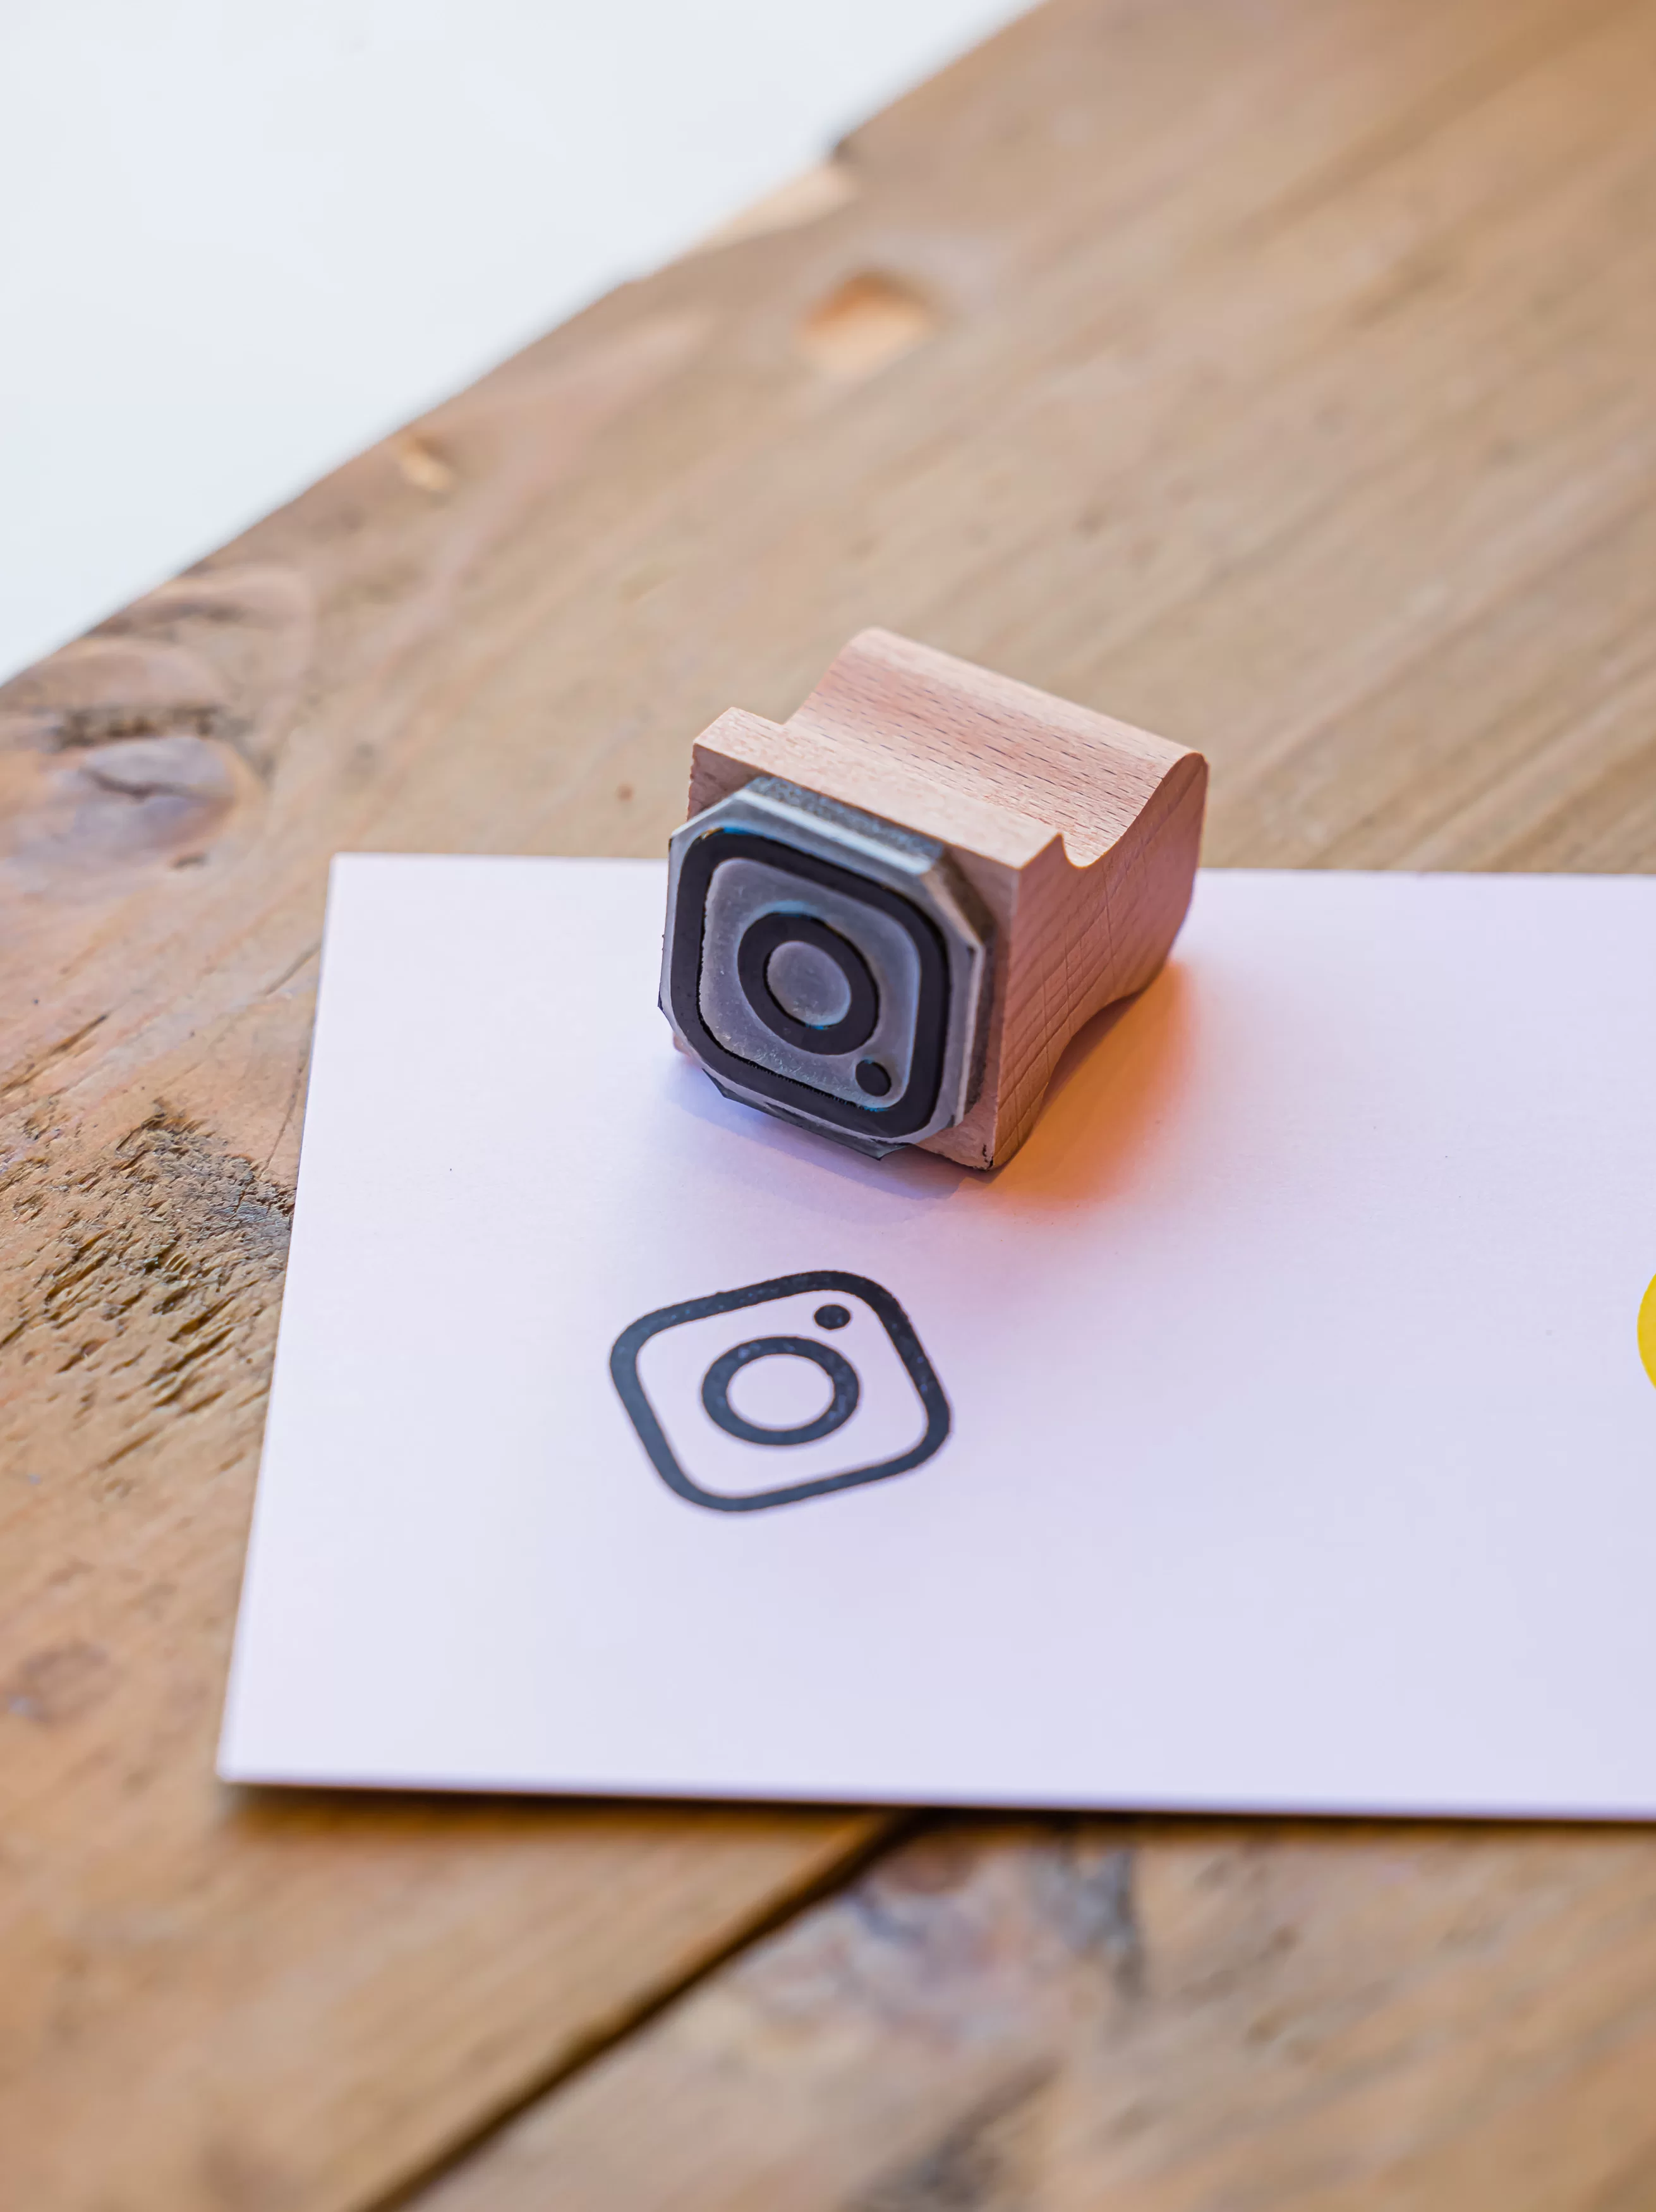 Rubber Stamp with Instagram Logo on white paper